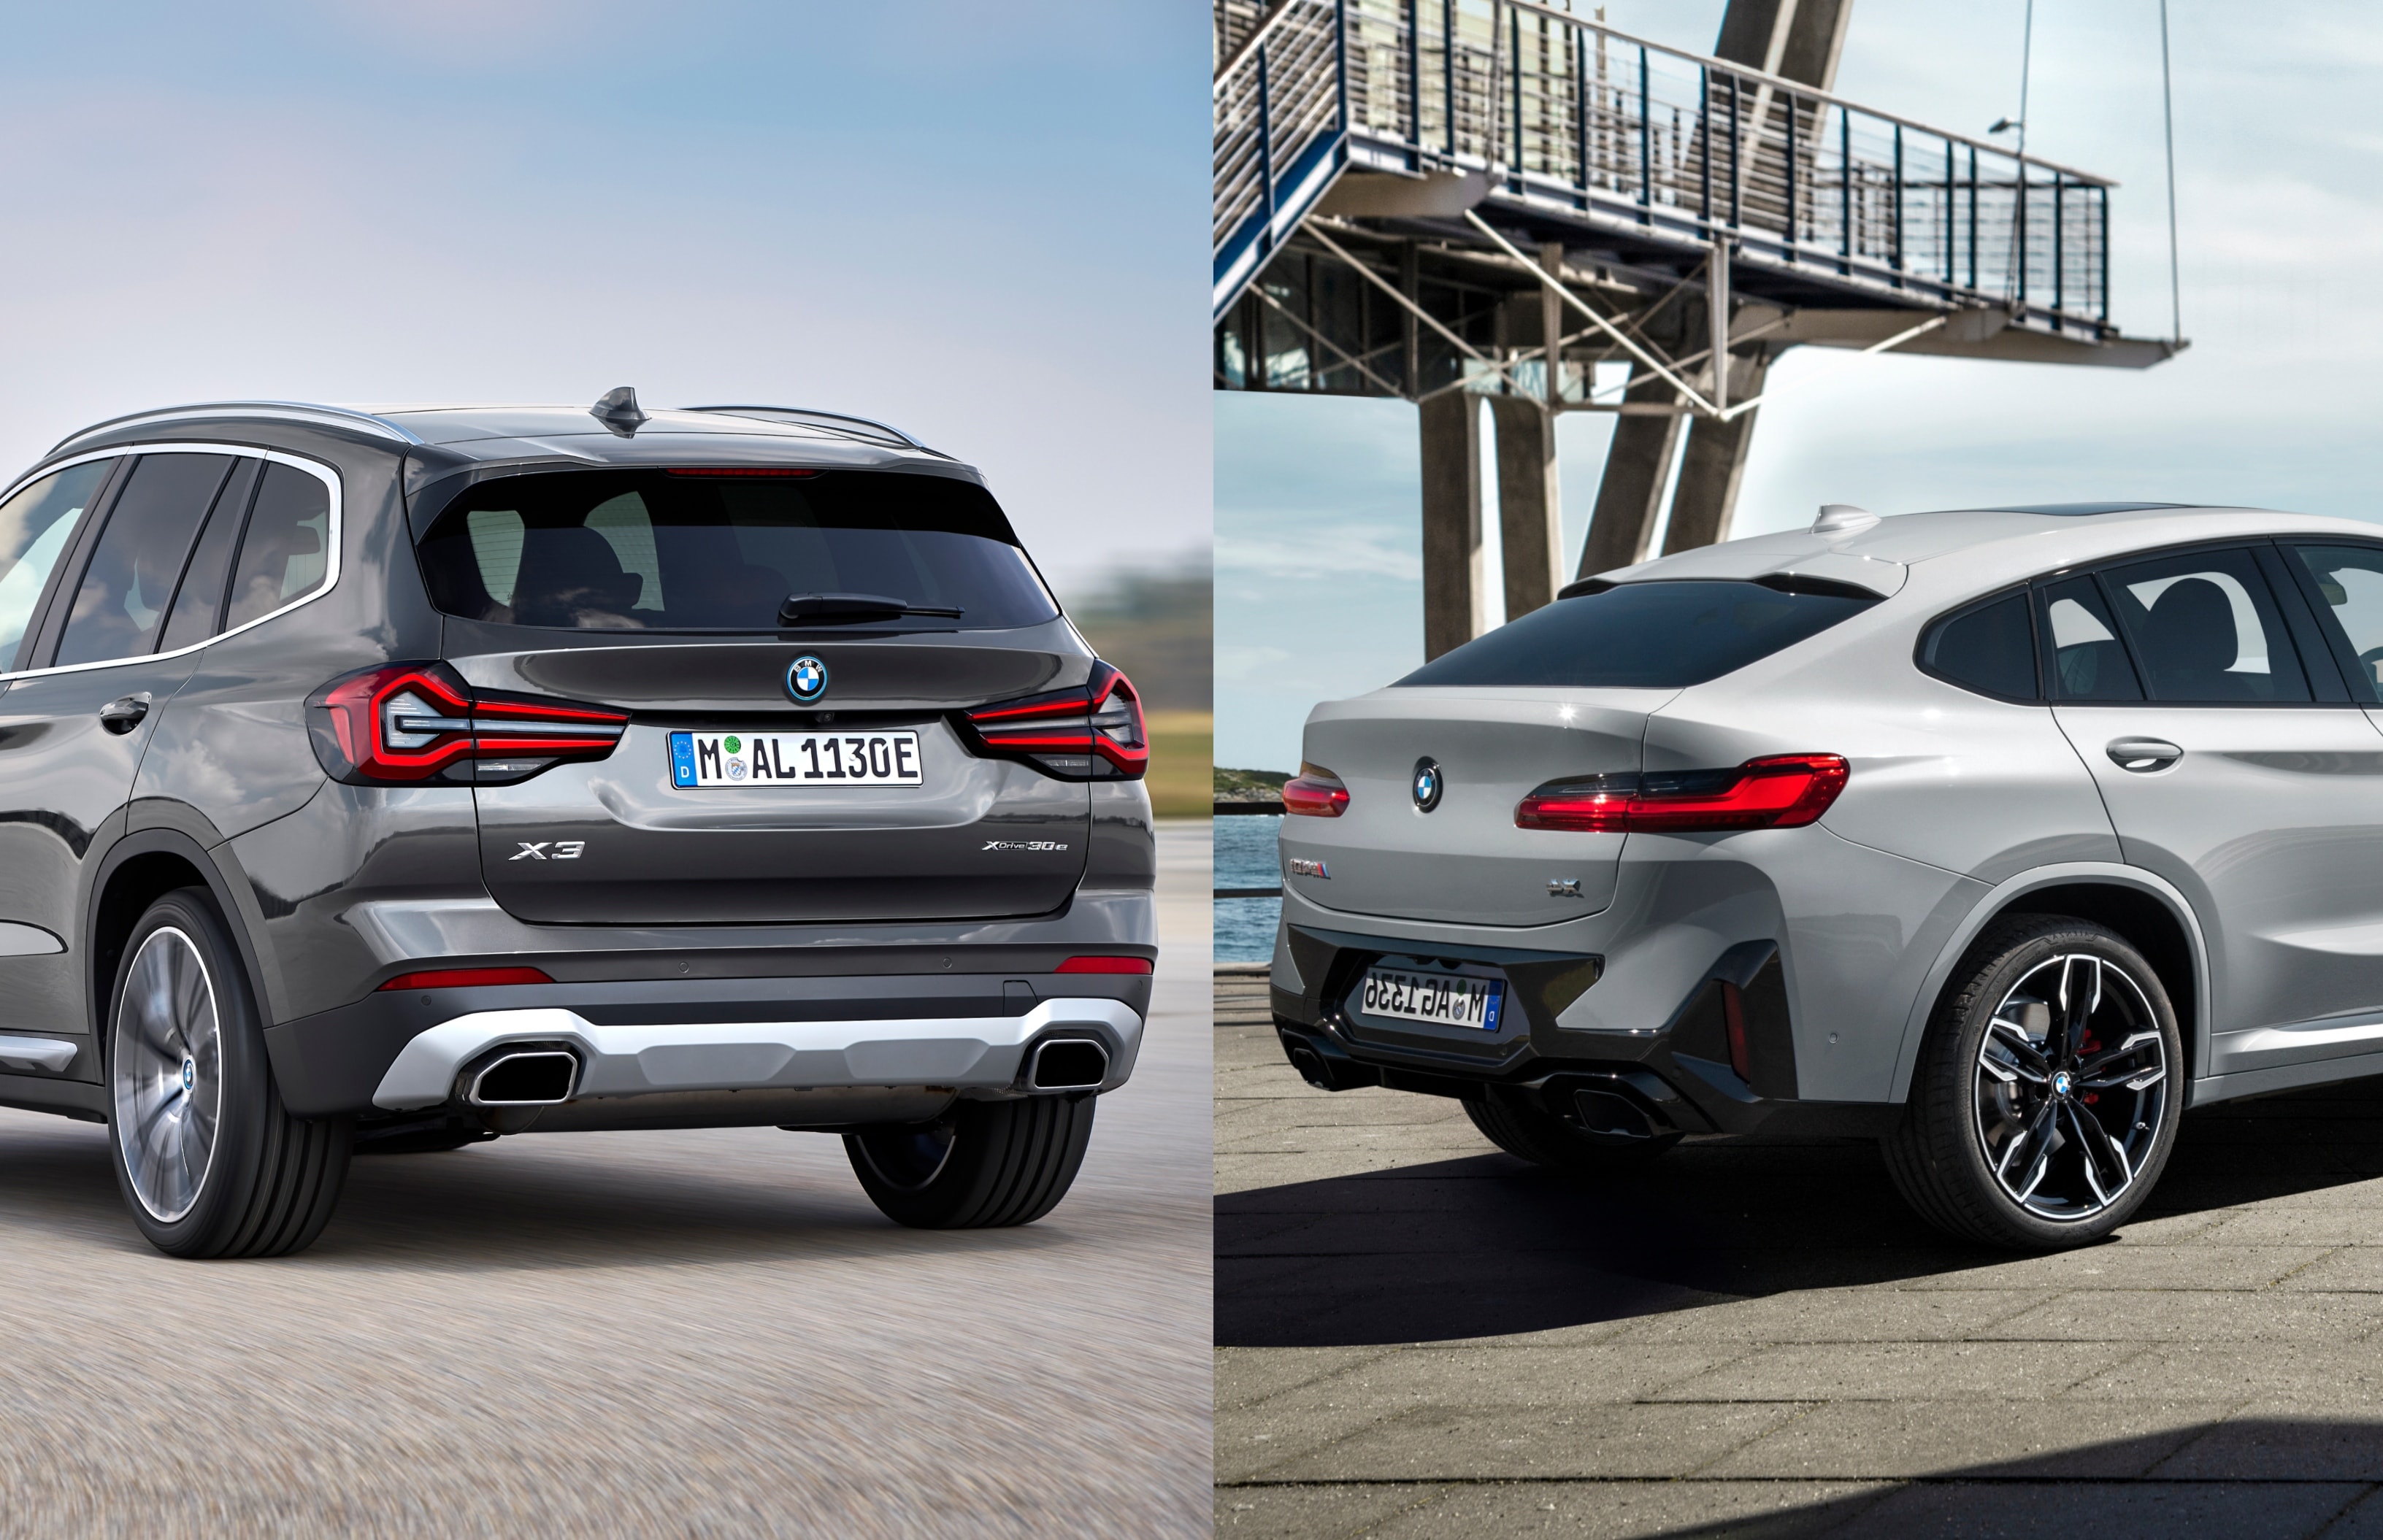 Rear of the BMW X3 (L) and BMW X4